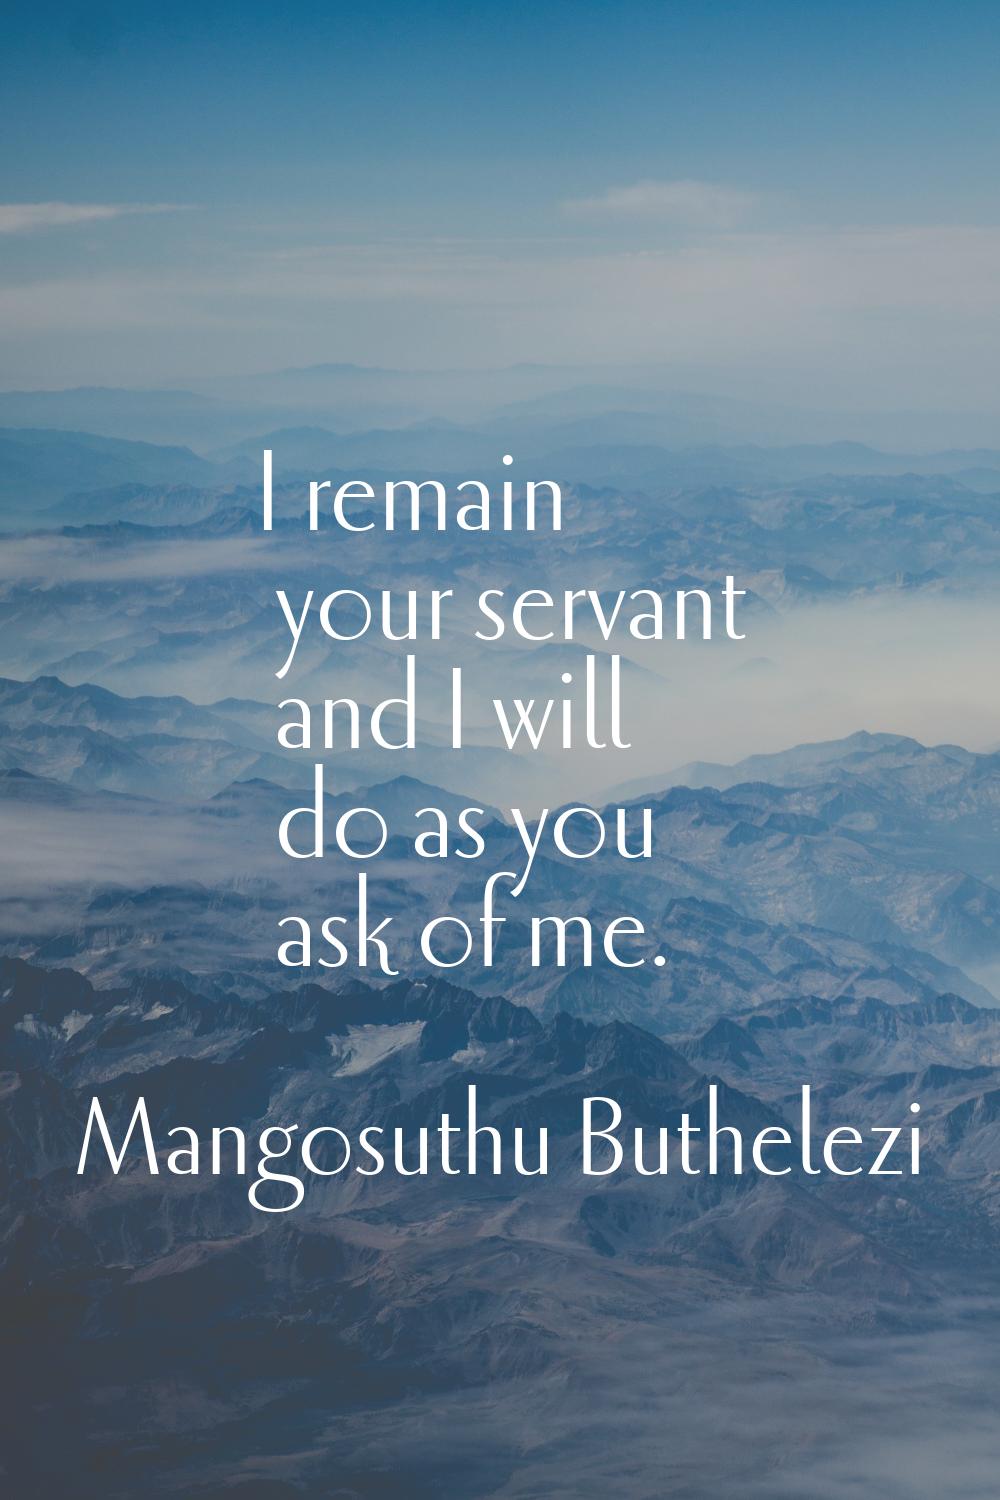 I remain your servant and I will do as you ask of me.